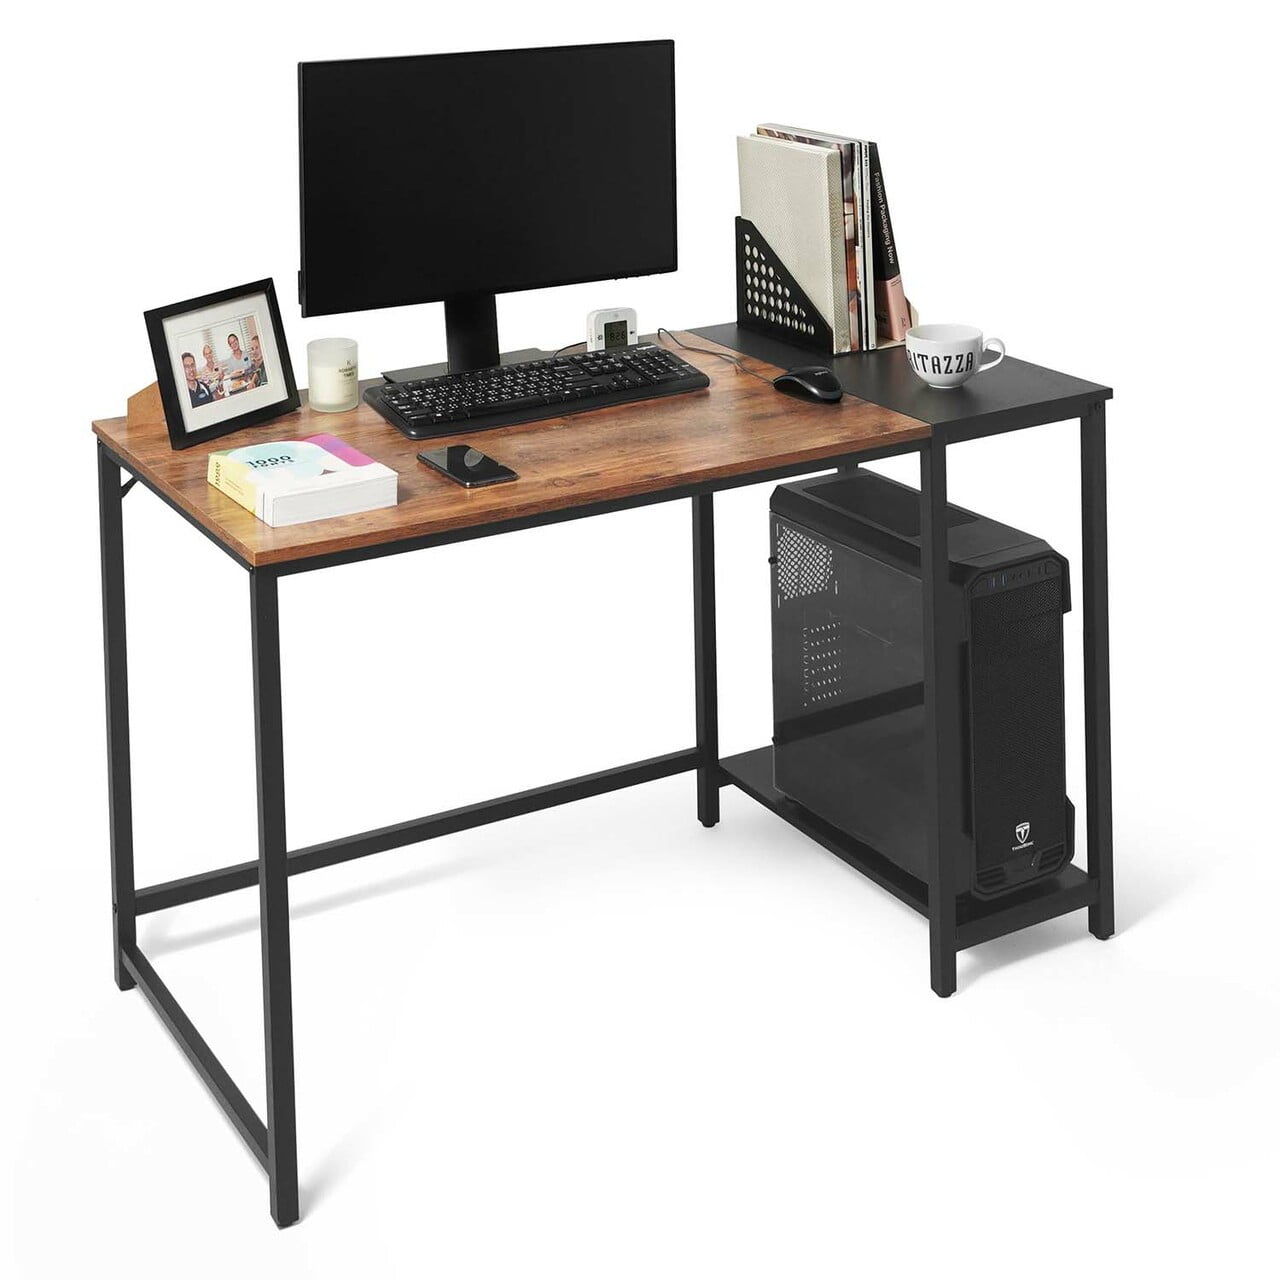 CAPHAUS Computer Desk, 47 Inch Home Office Desk, Study Writing Desk with  2-Tier Storage Shelves, Simple Industrial Modern Laptop Workstation with  Splice P2 Grade Wooden Board, Rustic Oak and Black 